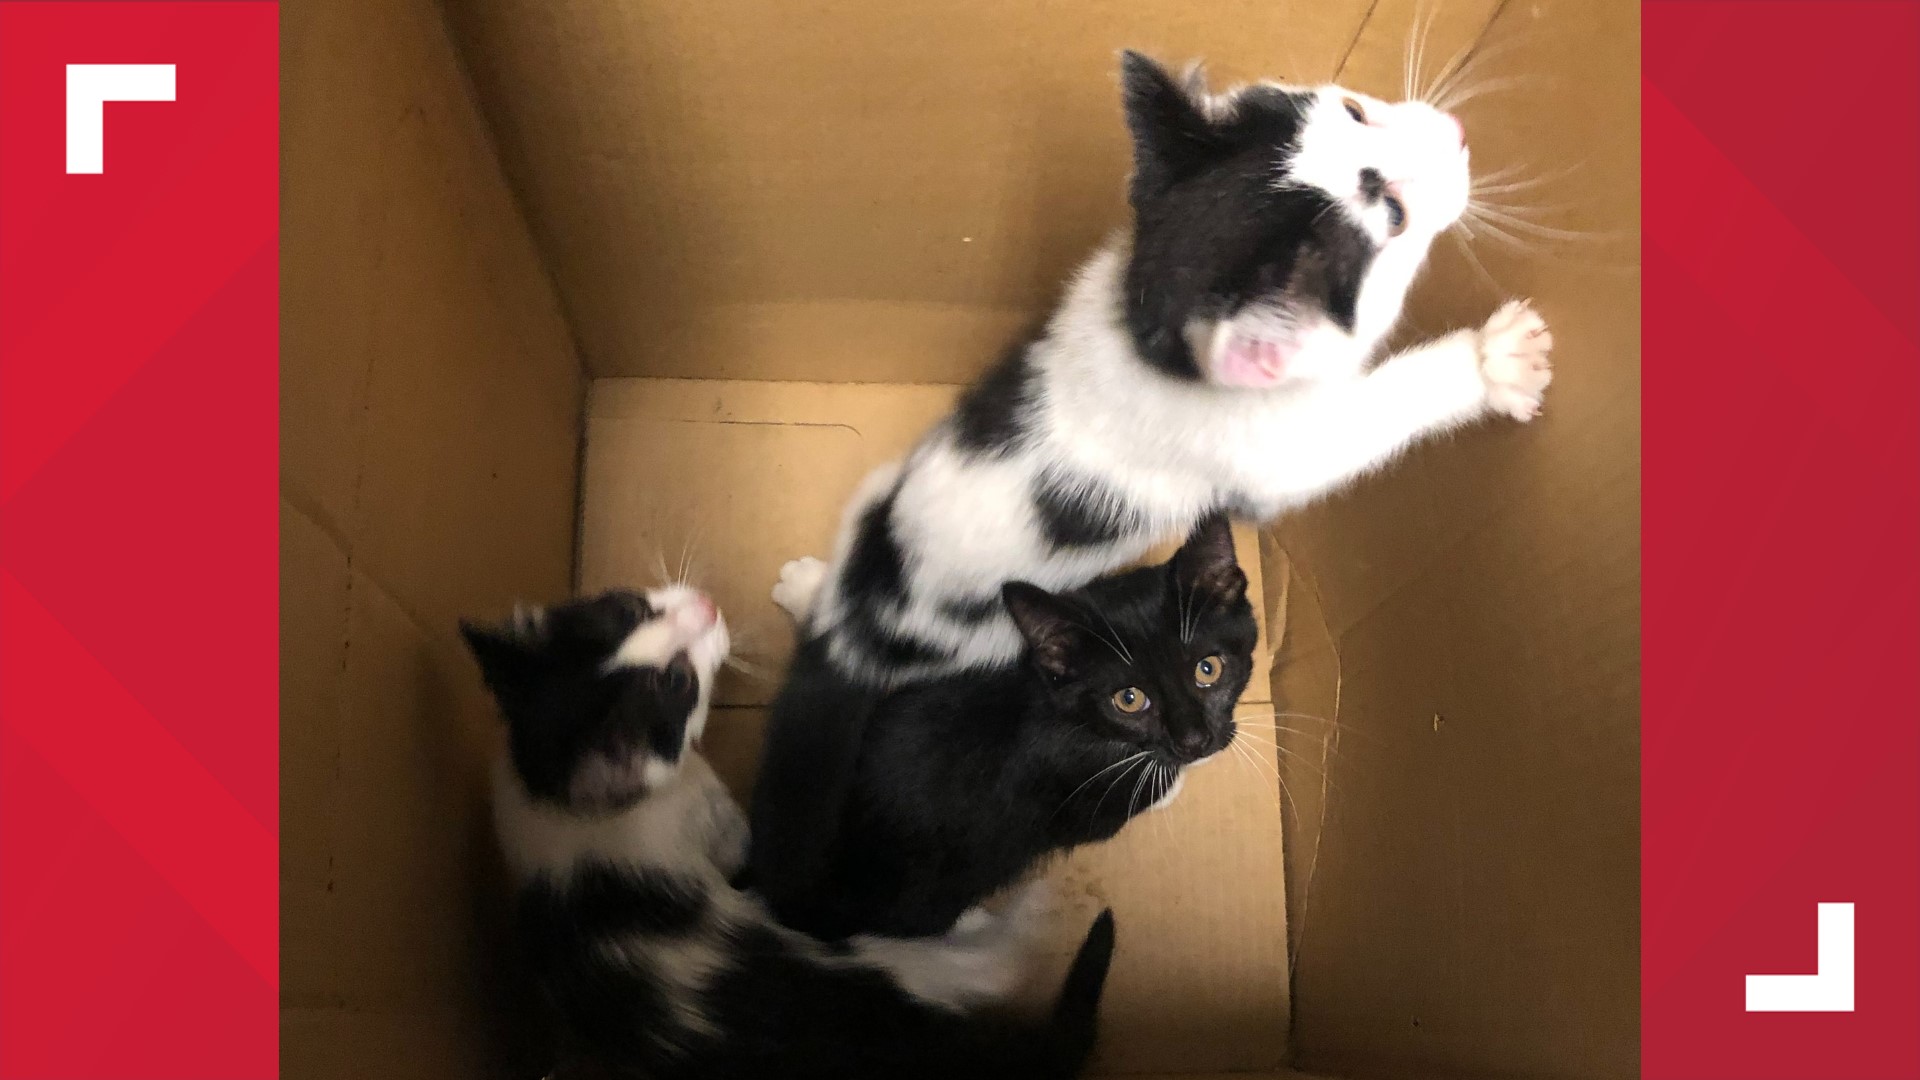 A woman who was visiting a grave found the box and brought the three kittens to the Portage County Animal Protective League.